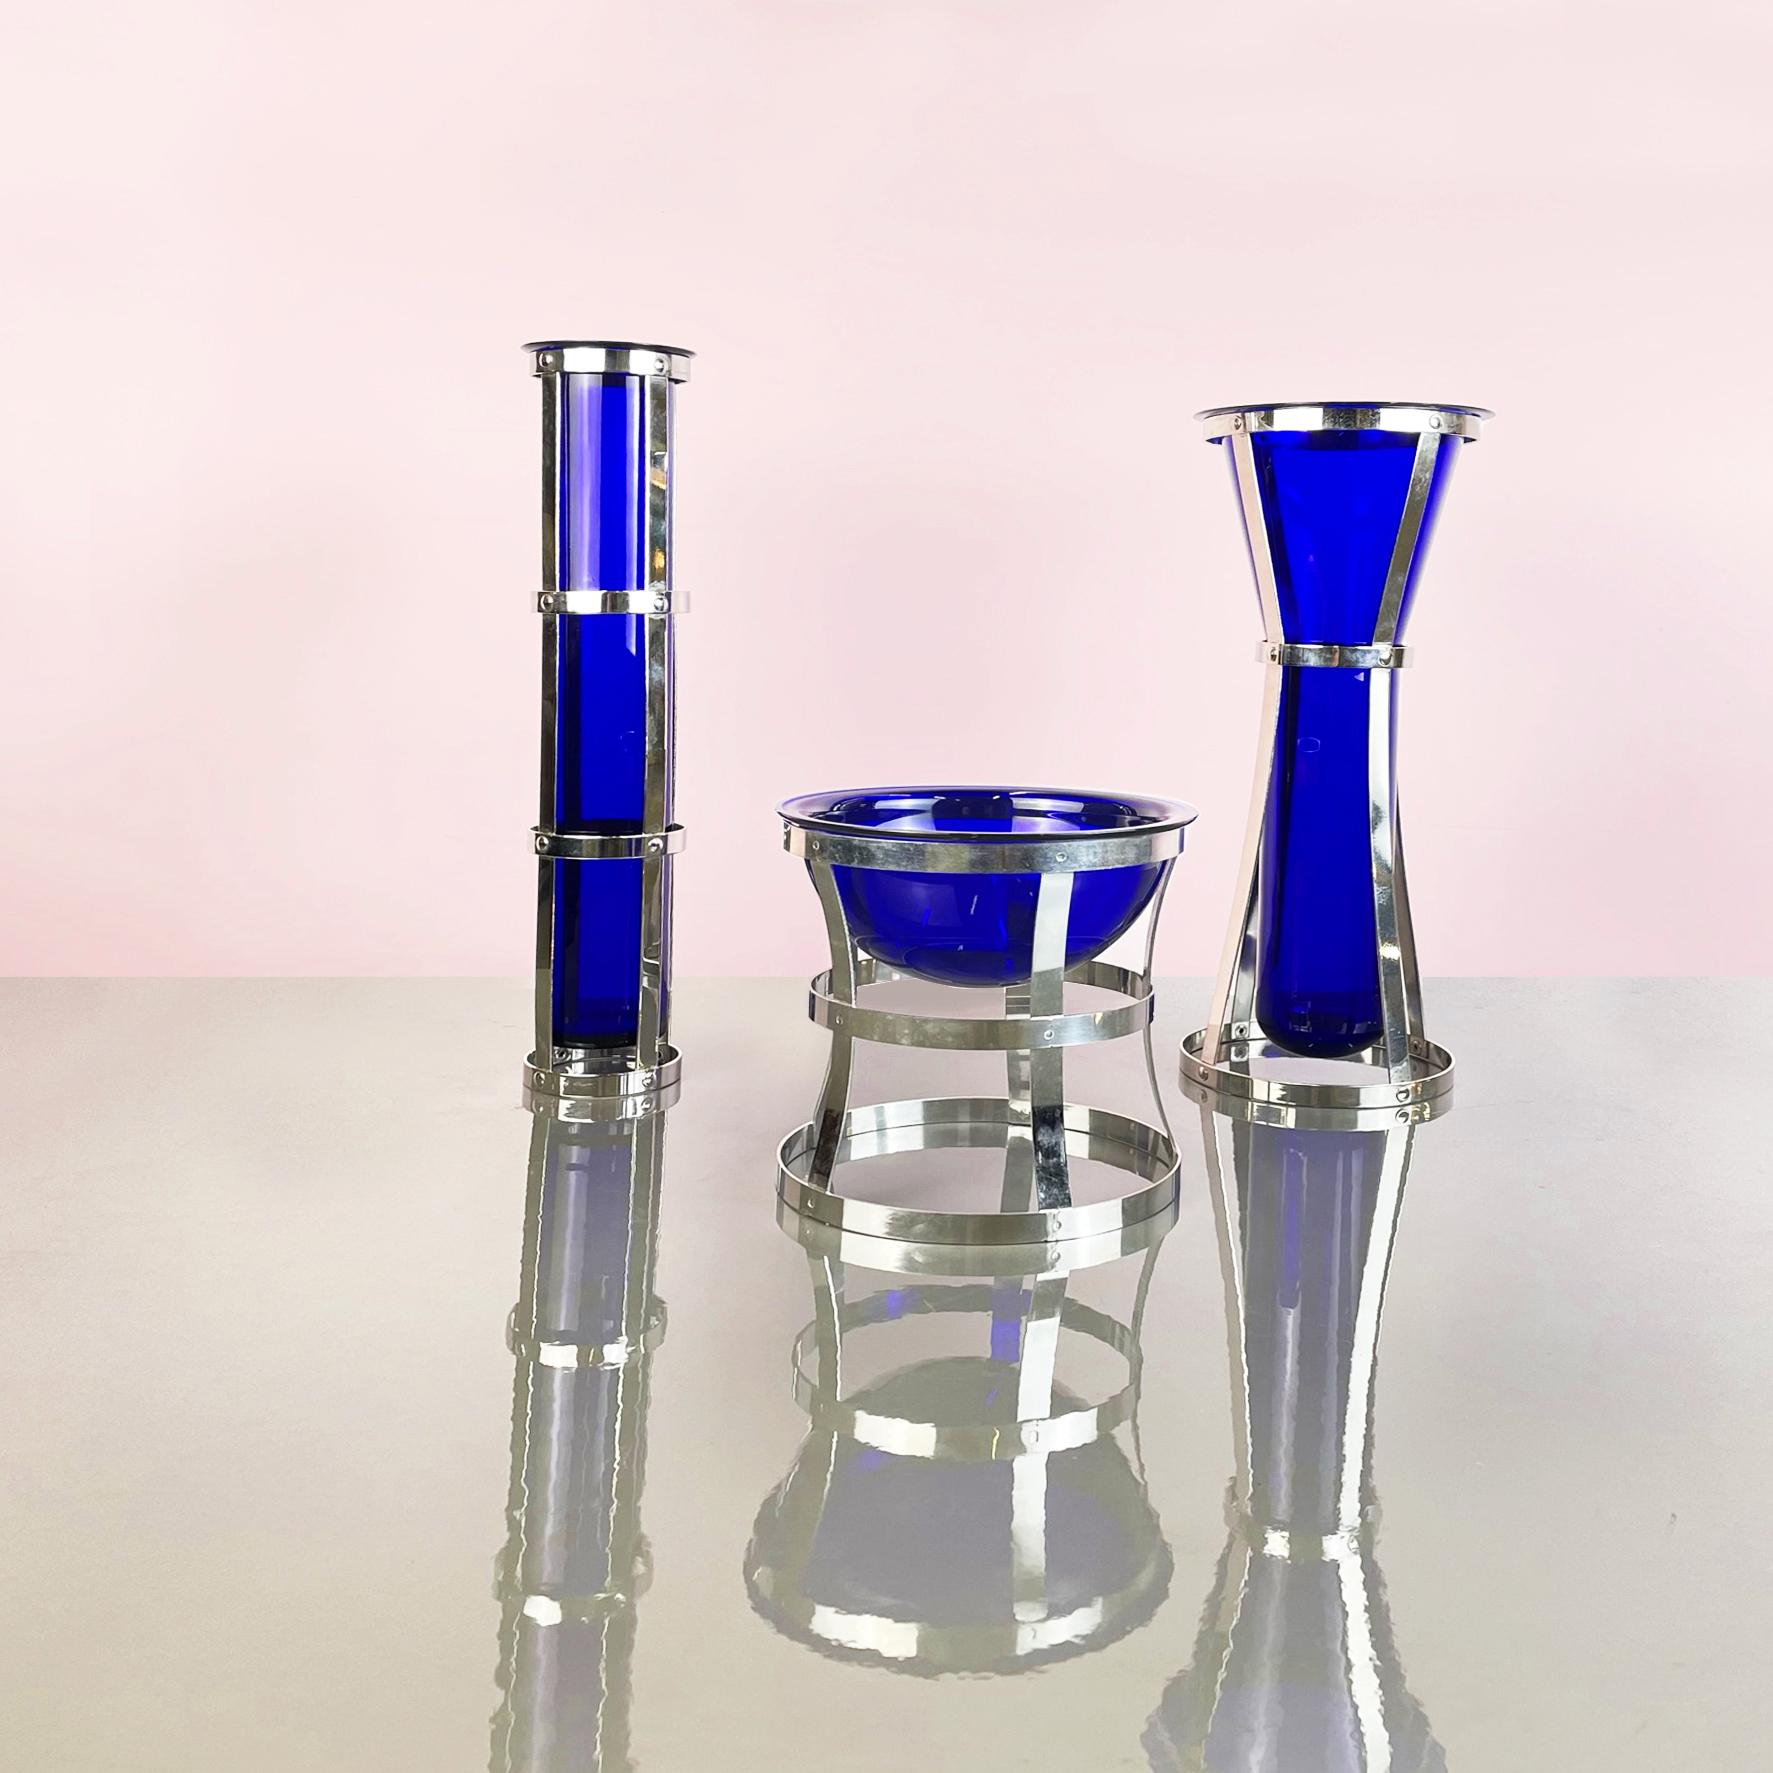 Italian Postmodern Blue Murano glass and metal Vases mod. Umeda by Cleto Munari, 2000s
Set of three vases mod. Umeda in blue Murano glass, resting on the metal structure that follows the shape of the vase. The three vases have different shapes: the